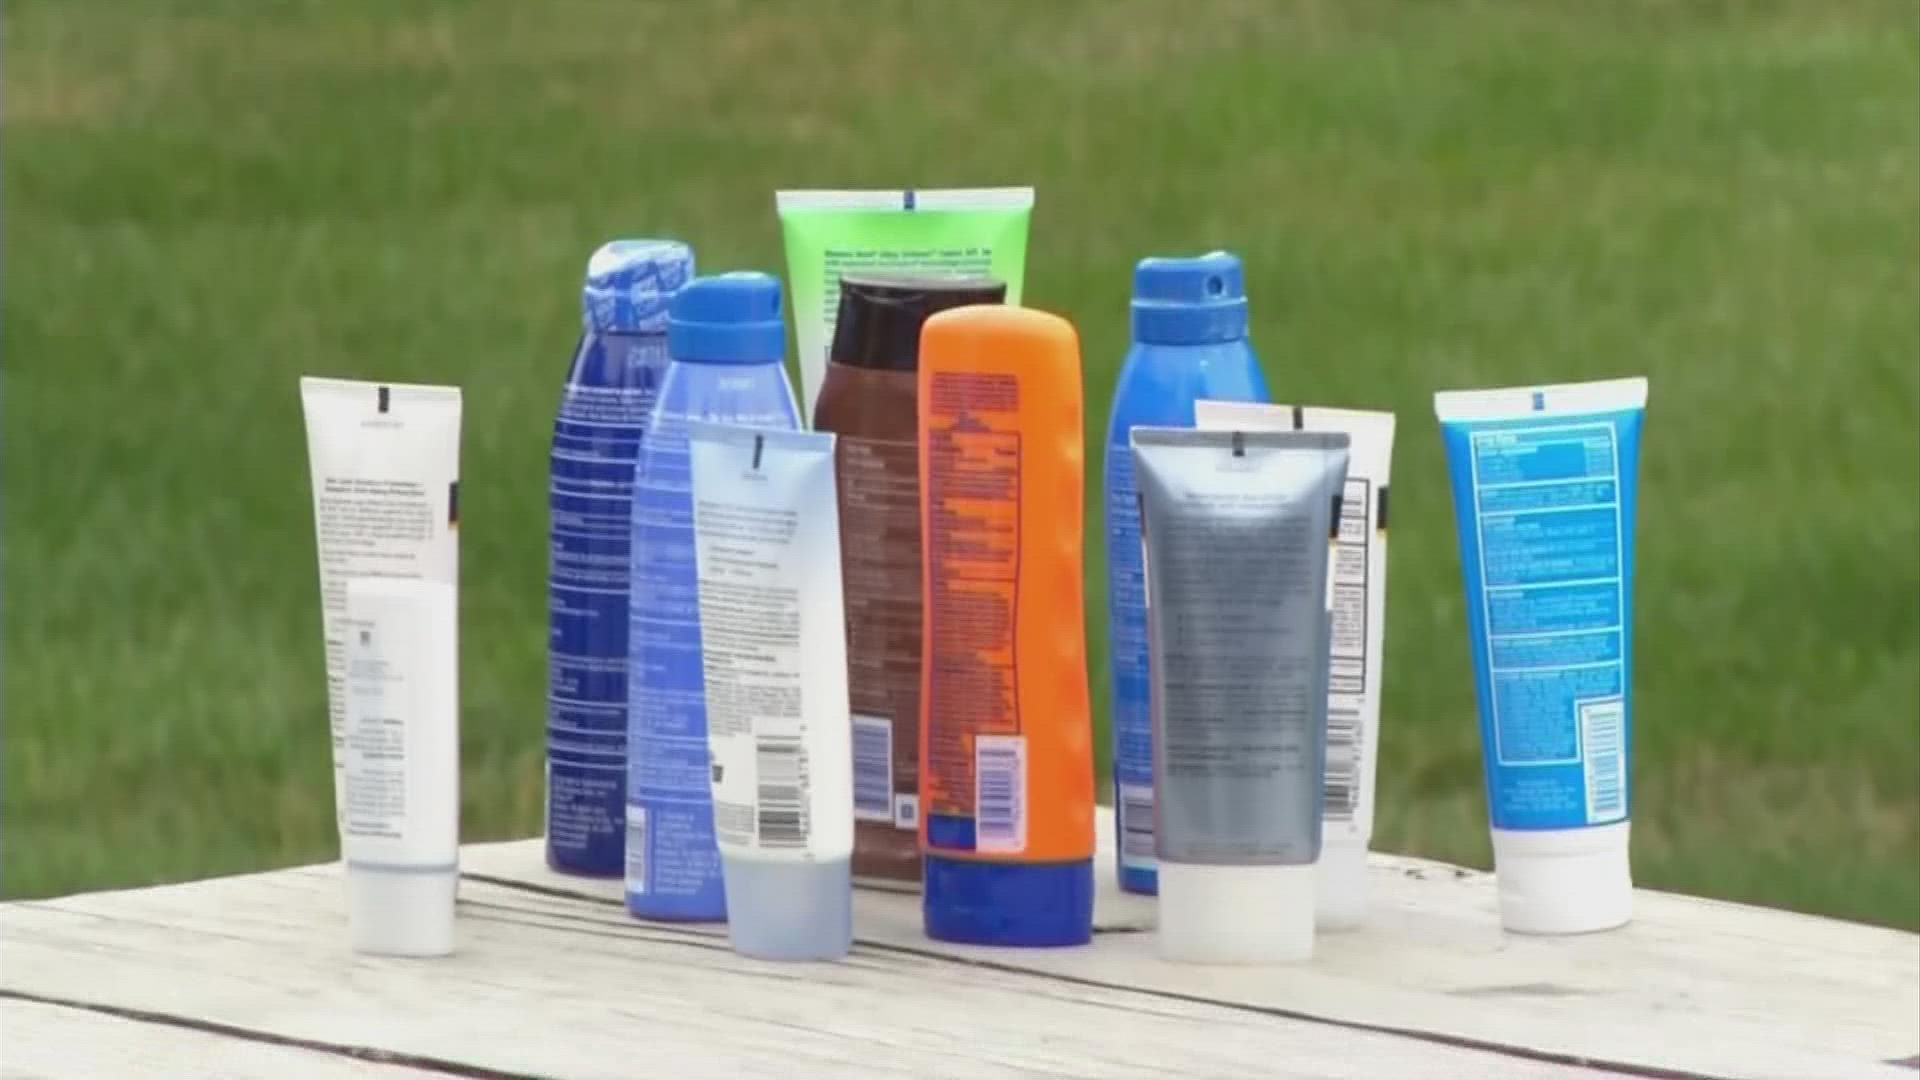 The FDA and American Academy of Pediatrics say certain sunscreens can cause side effects.